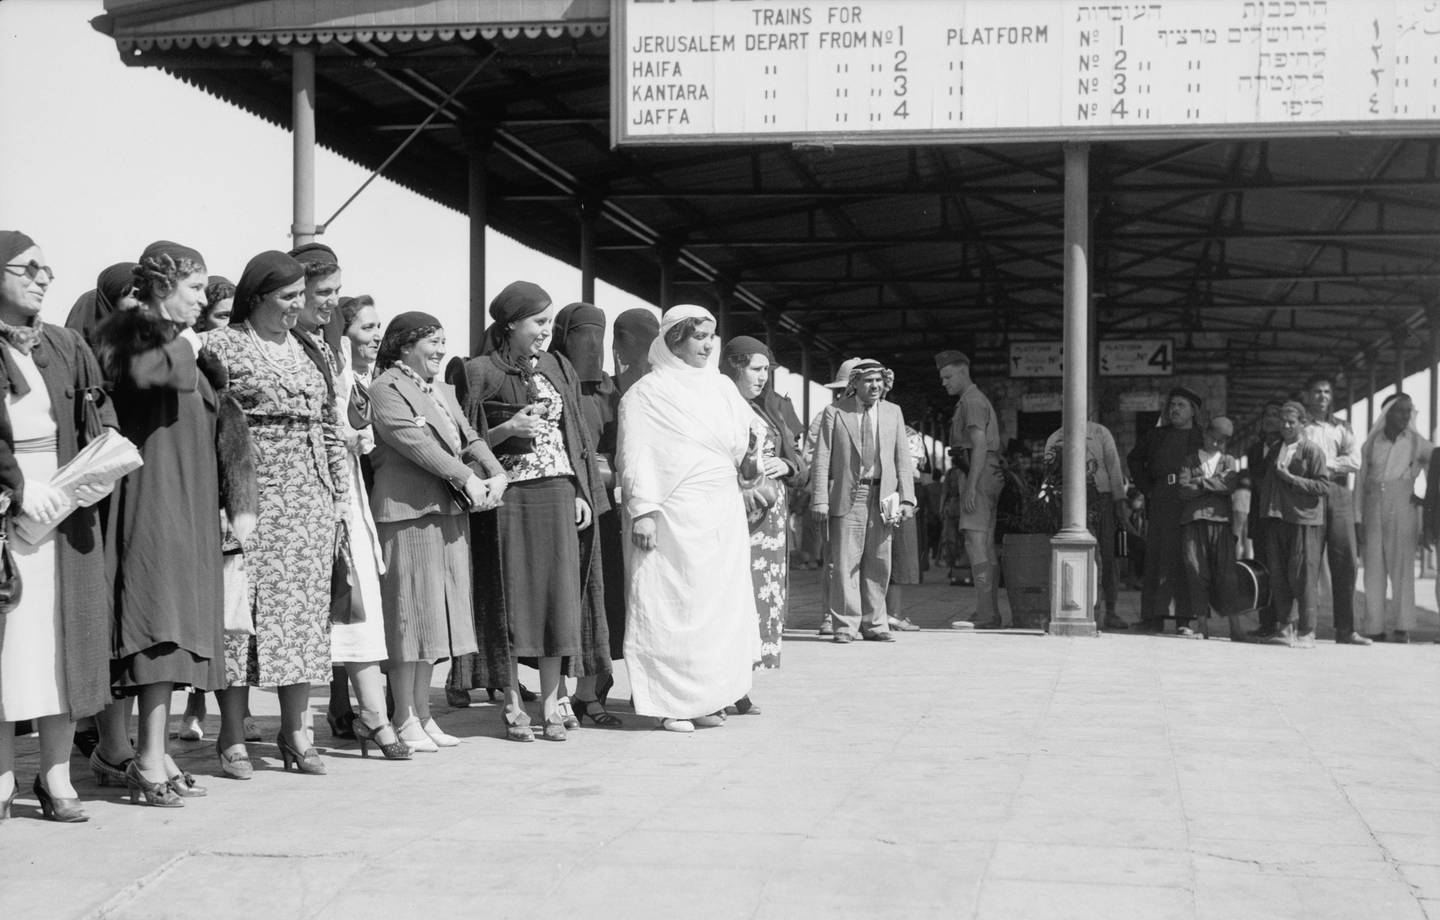 The train to Damascus at Samakh station, at the southern tip of the Sea of Galilee, early 1920s. LoC Matson Collection